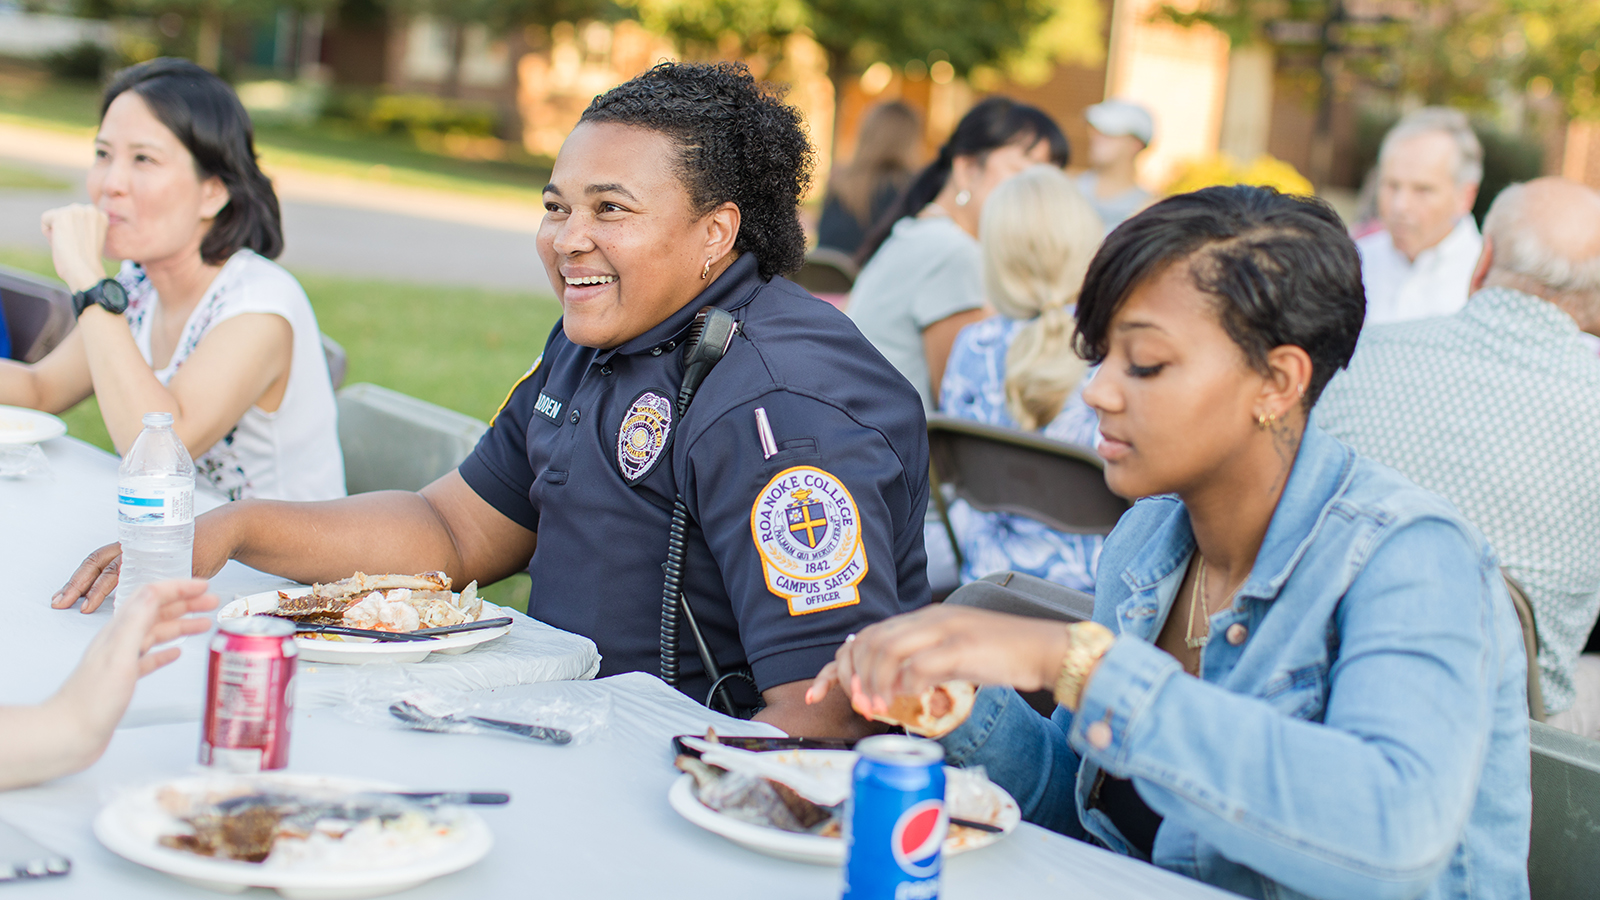 campus safety officer eating dinner with students